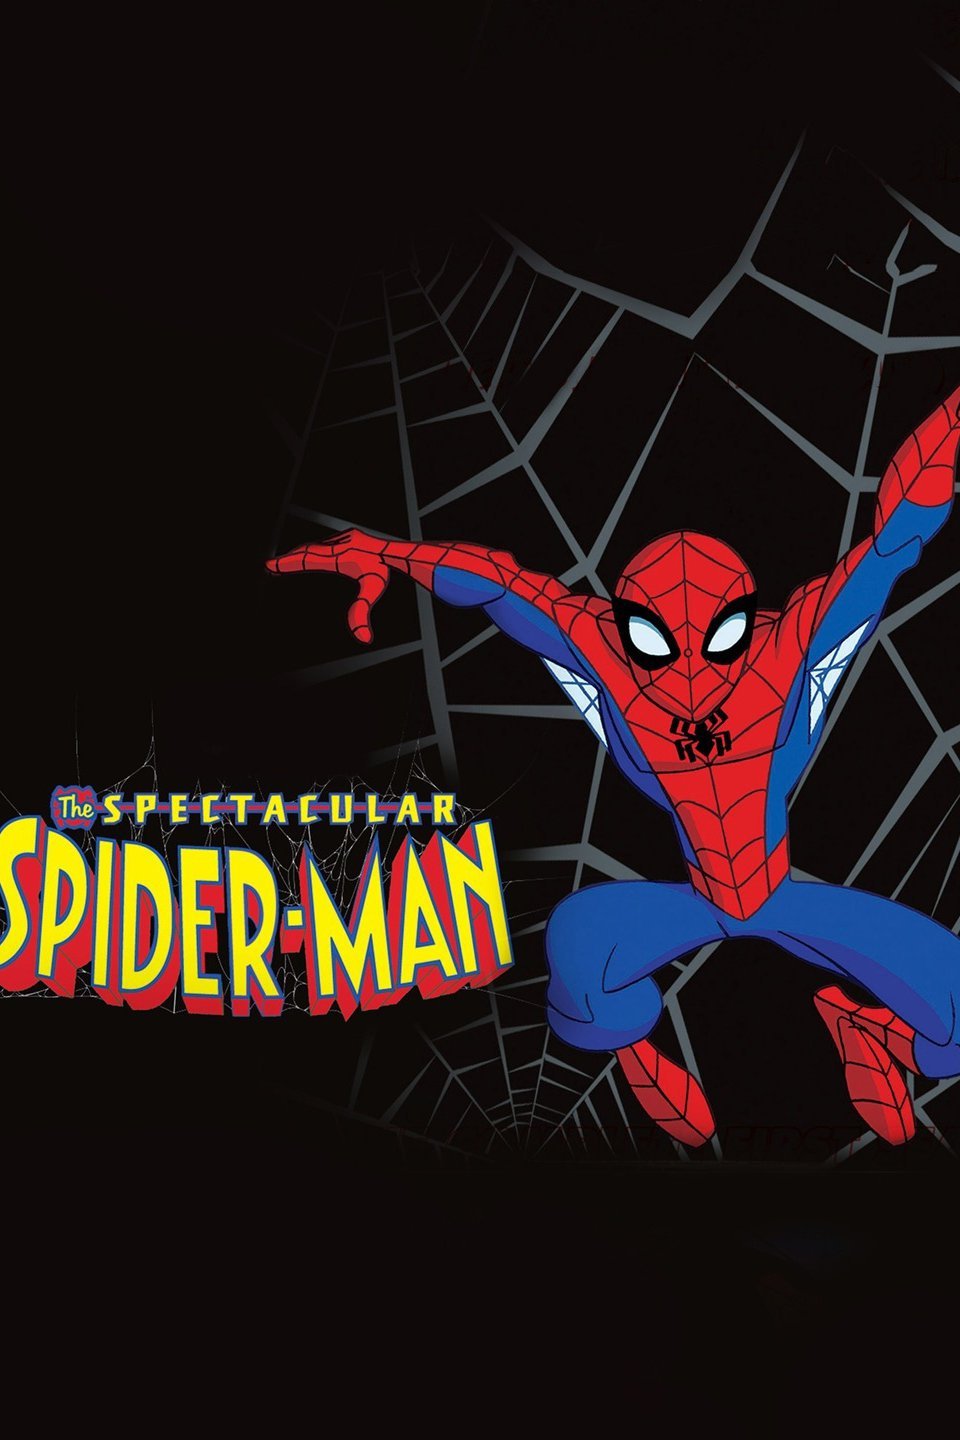 The Spectacular Spider-Man - Rotten Tomatoes